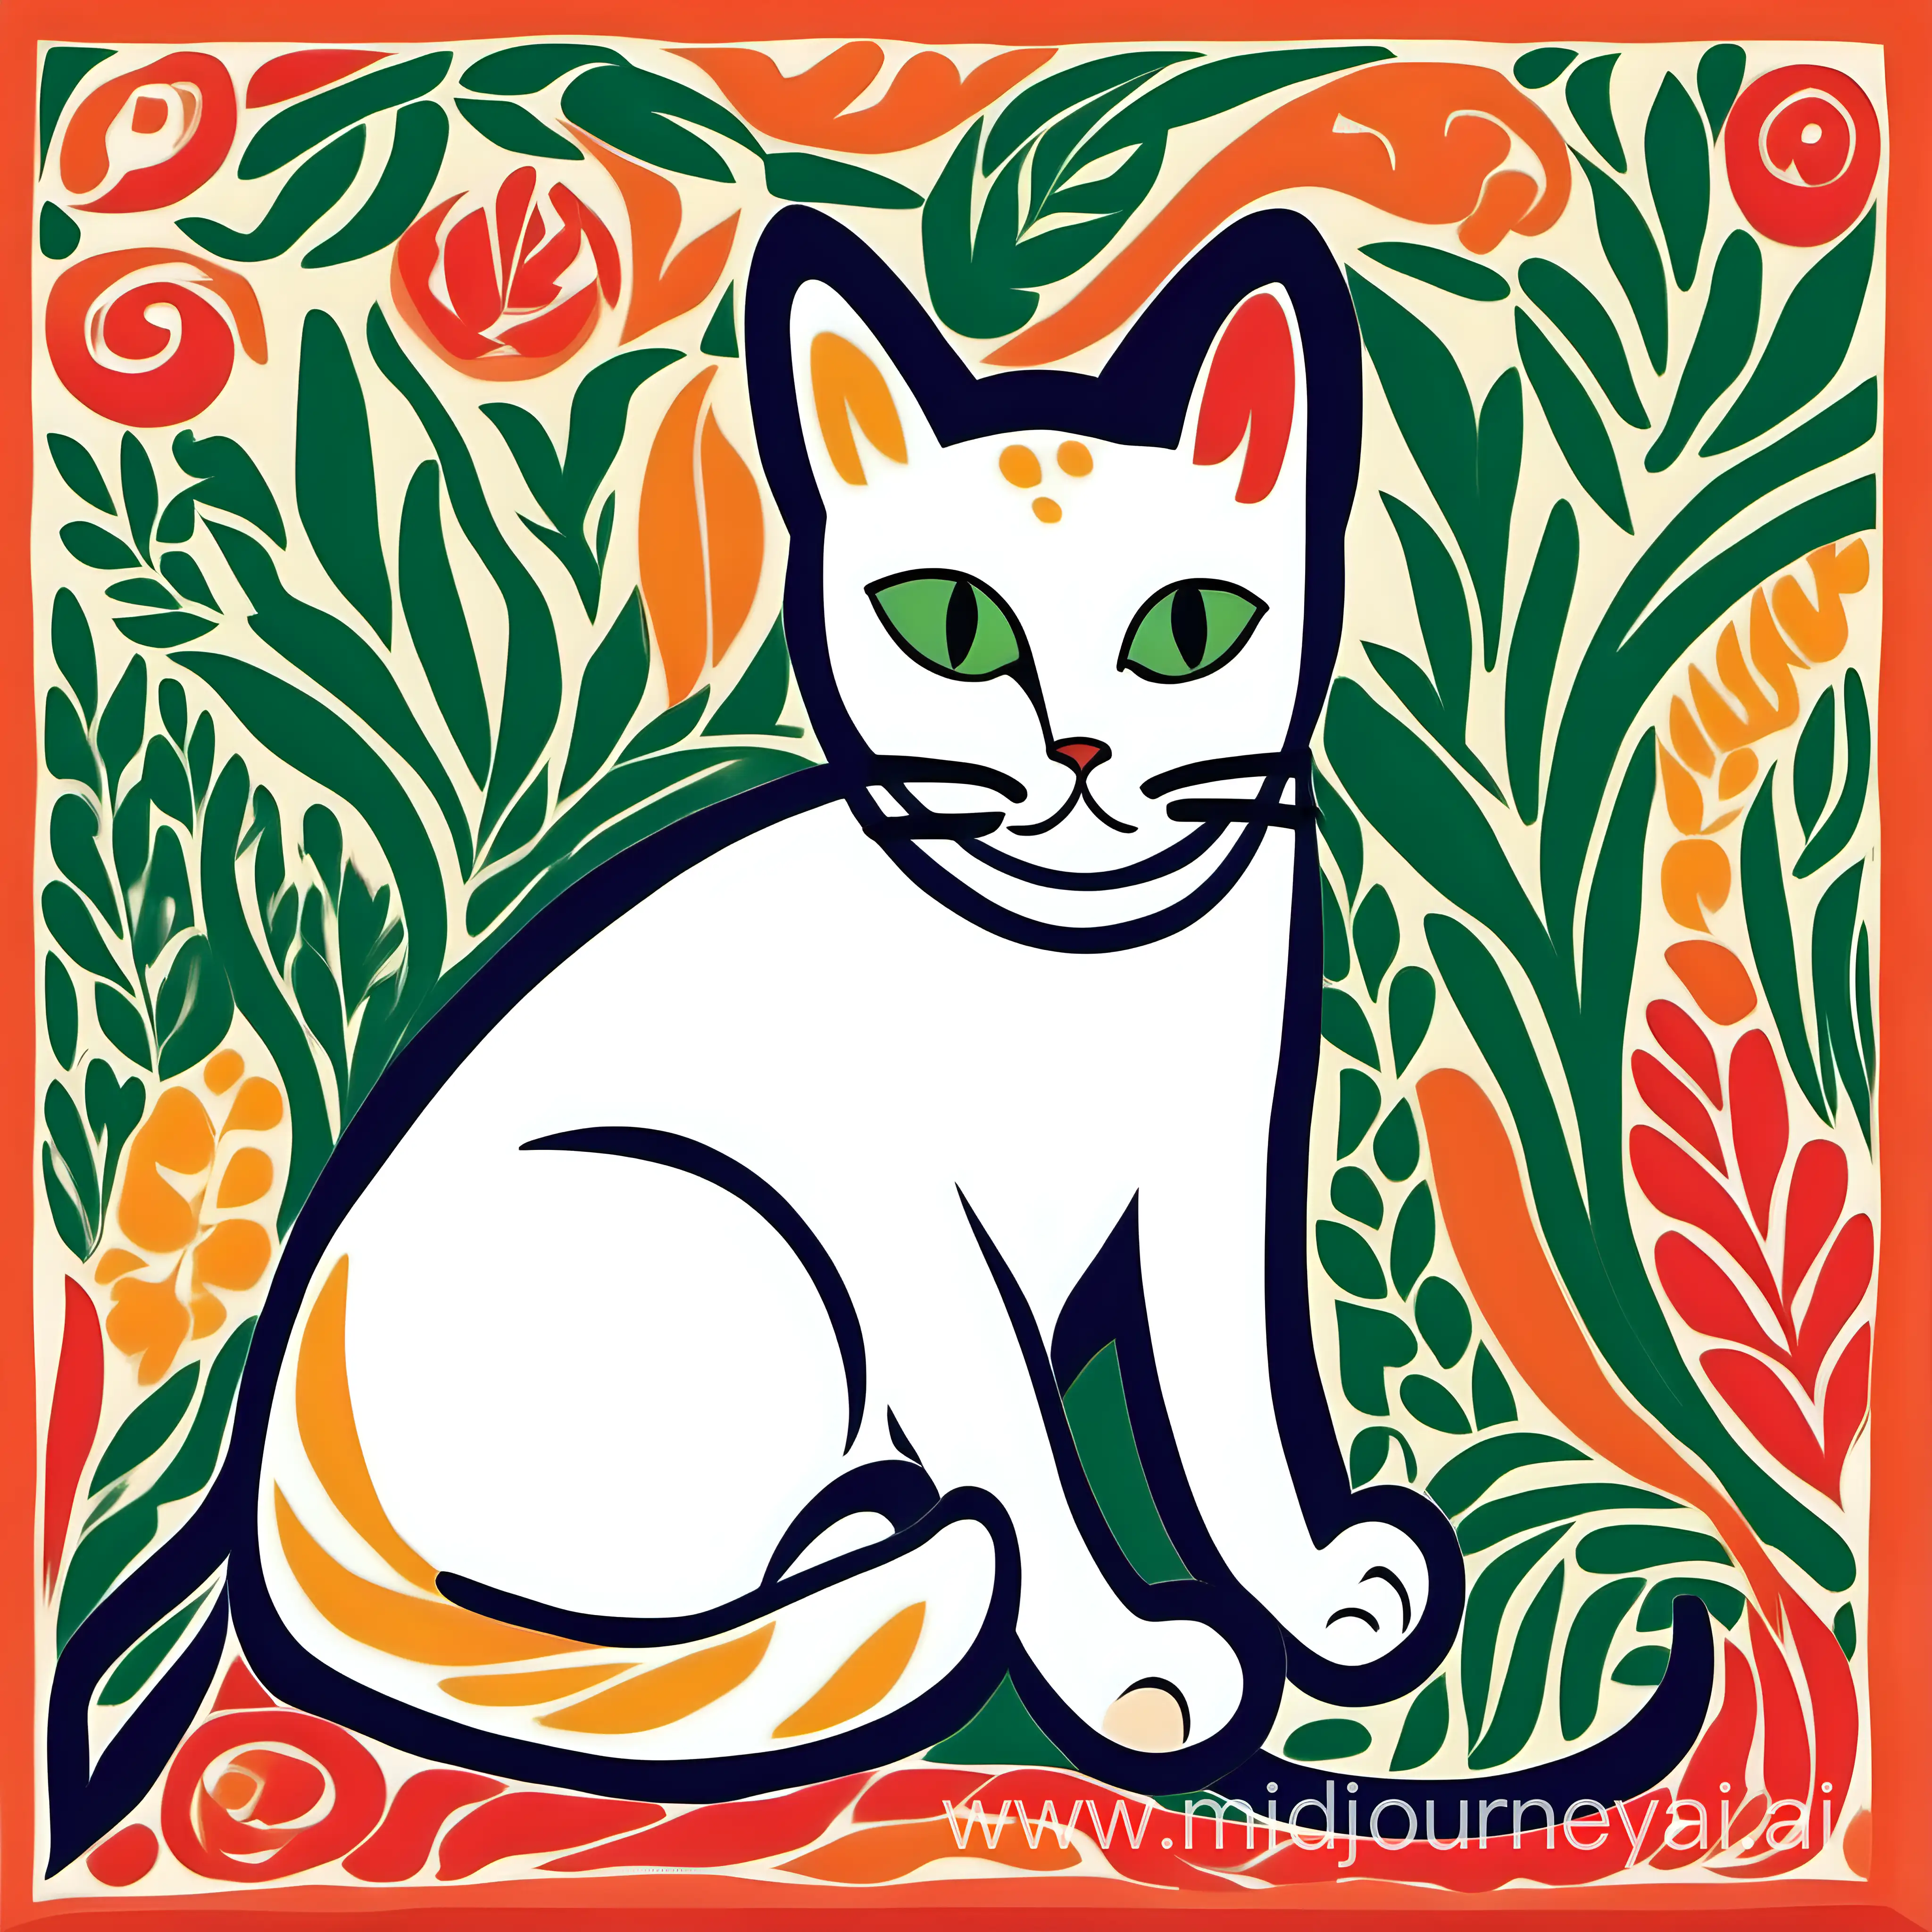 illustration of a cat, in the style of artist henri matisse, the Neo-Impressionist mode

